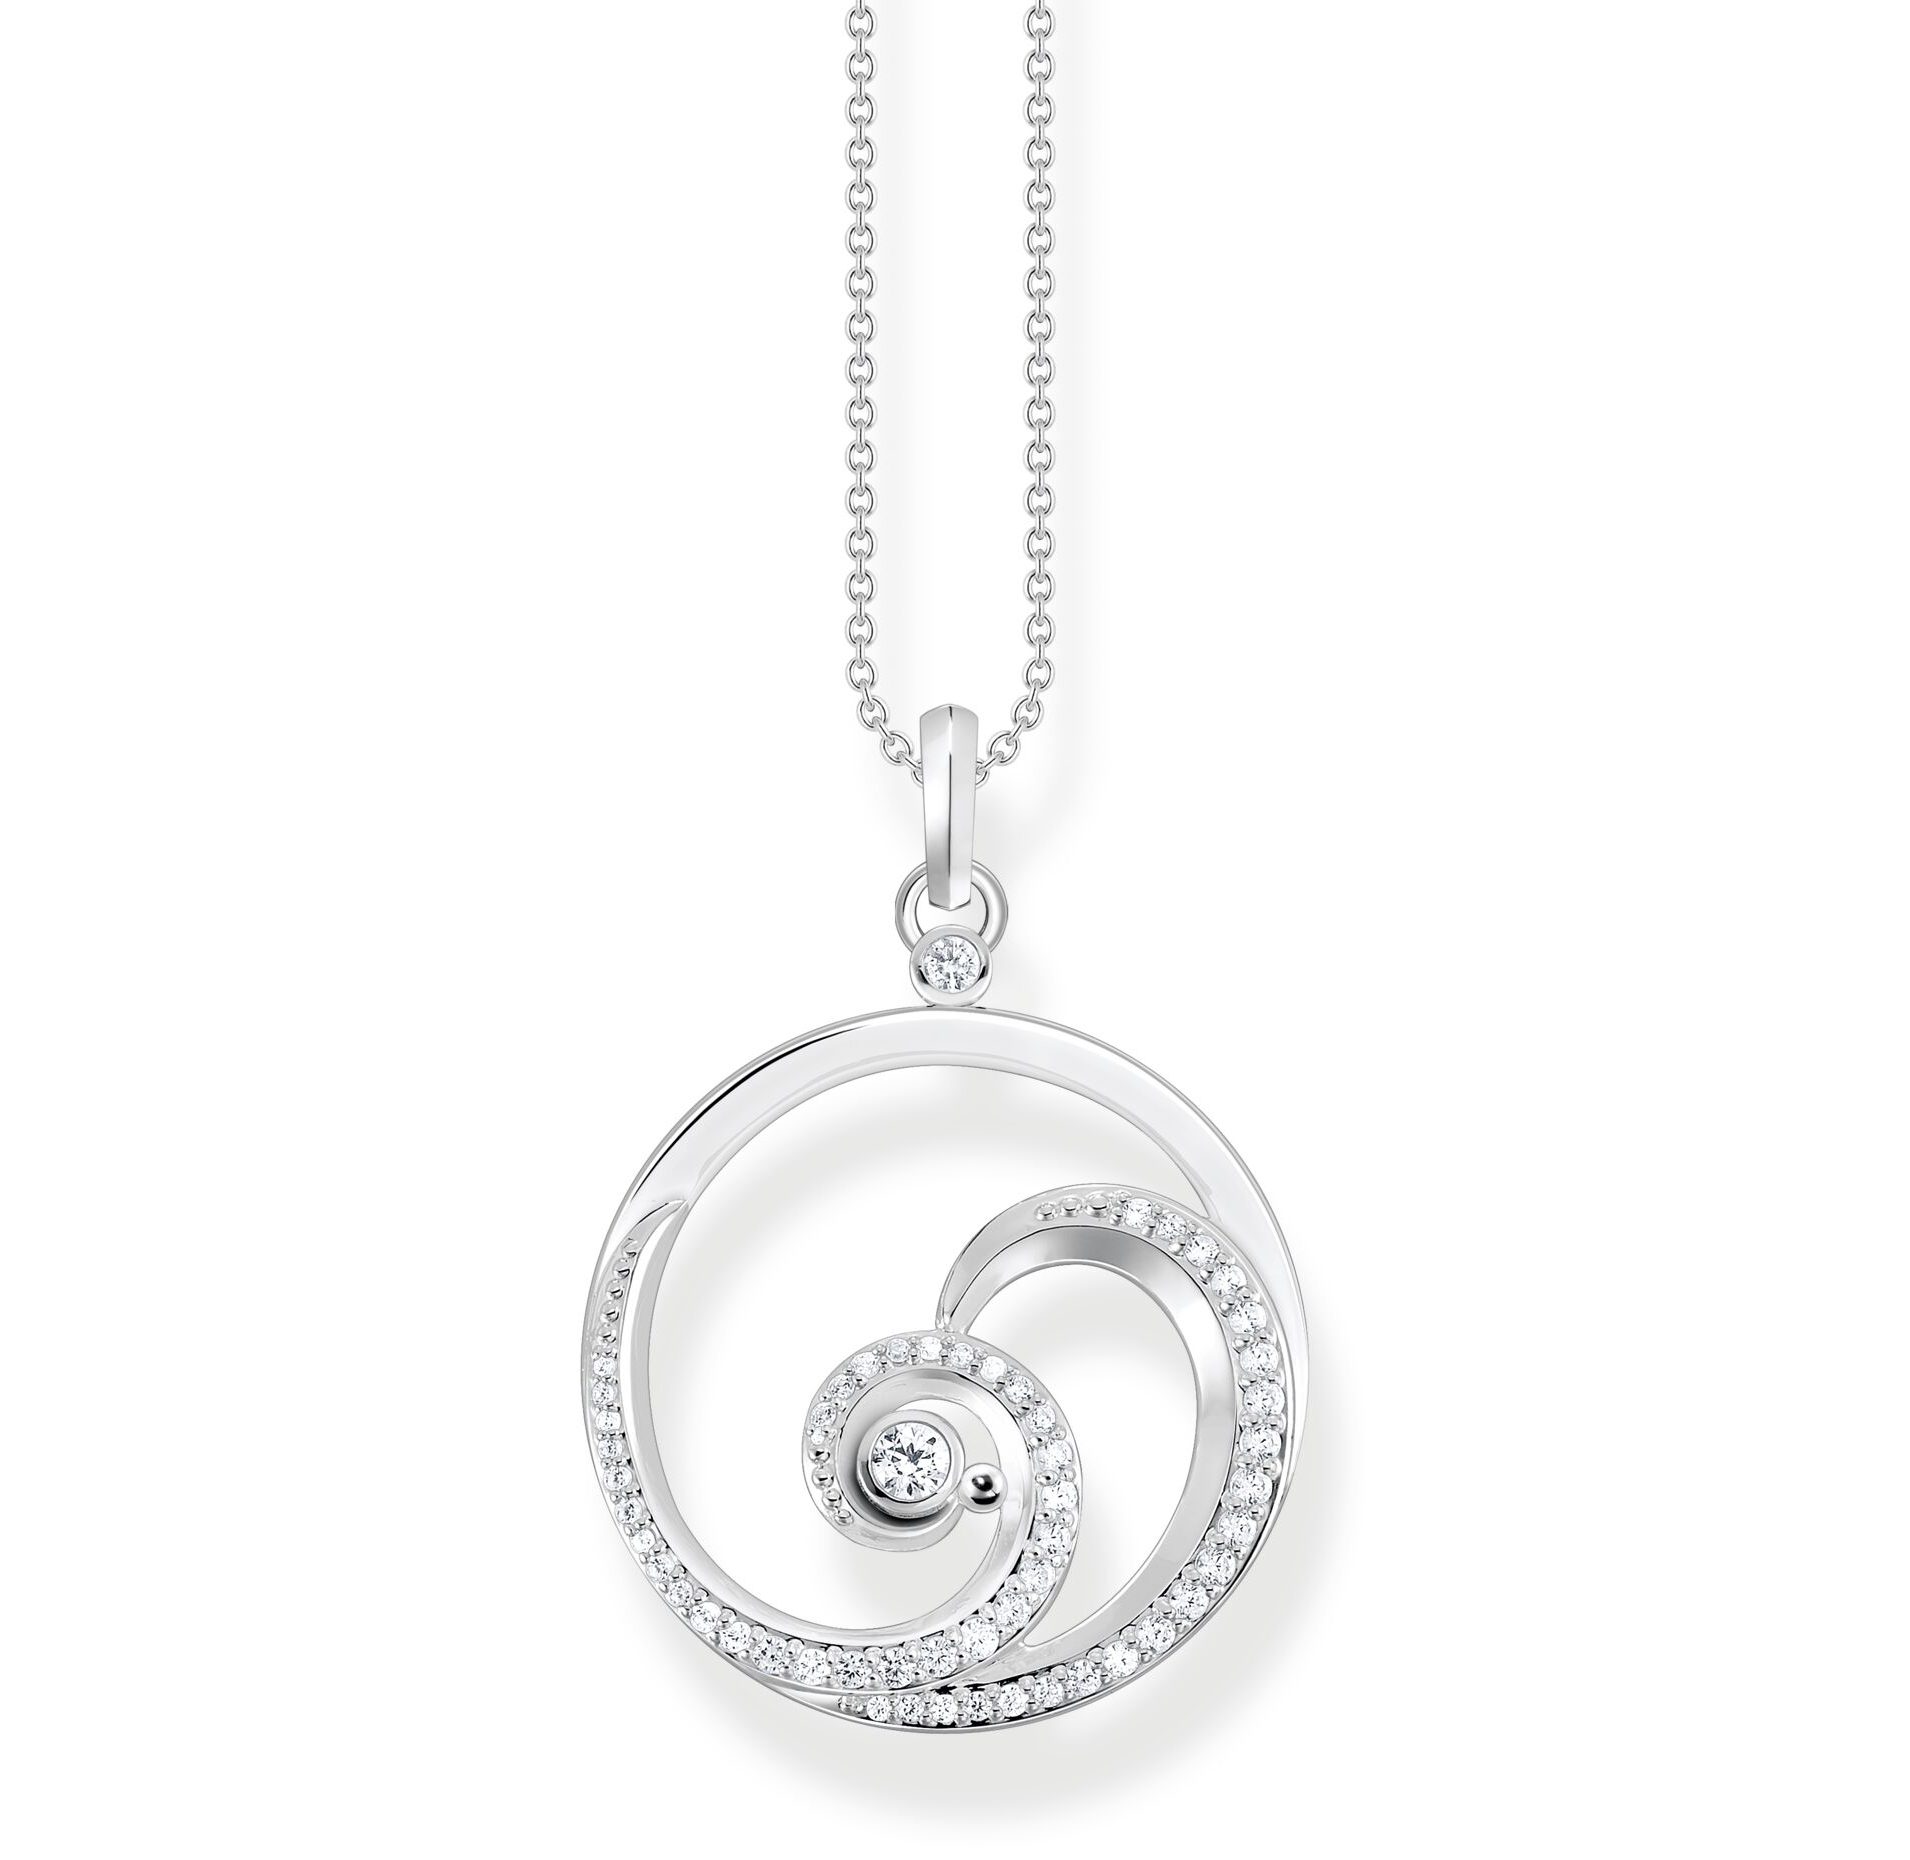 Embrace Ocean Vibes this summer with THOMAS SABO's stunning new ...